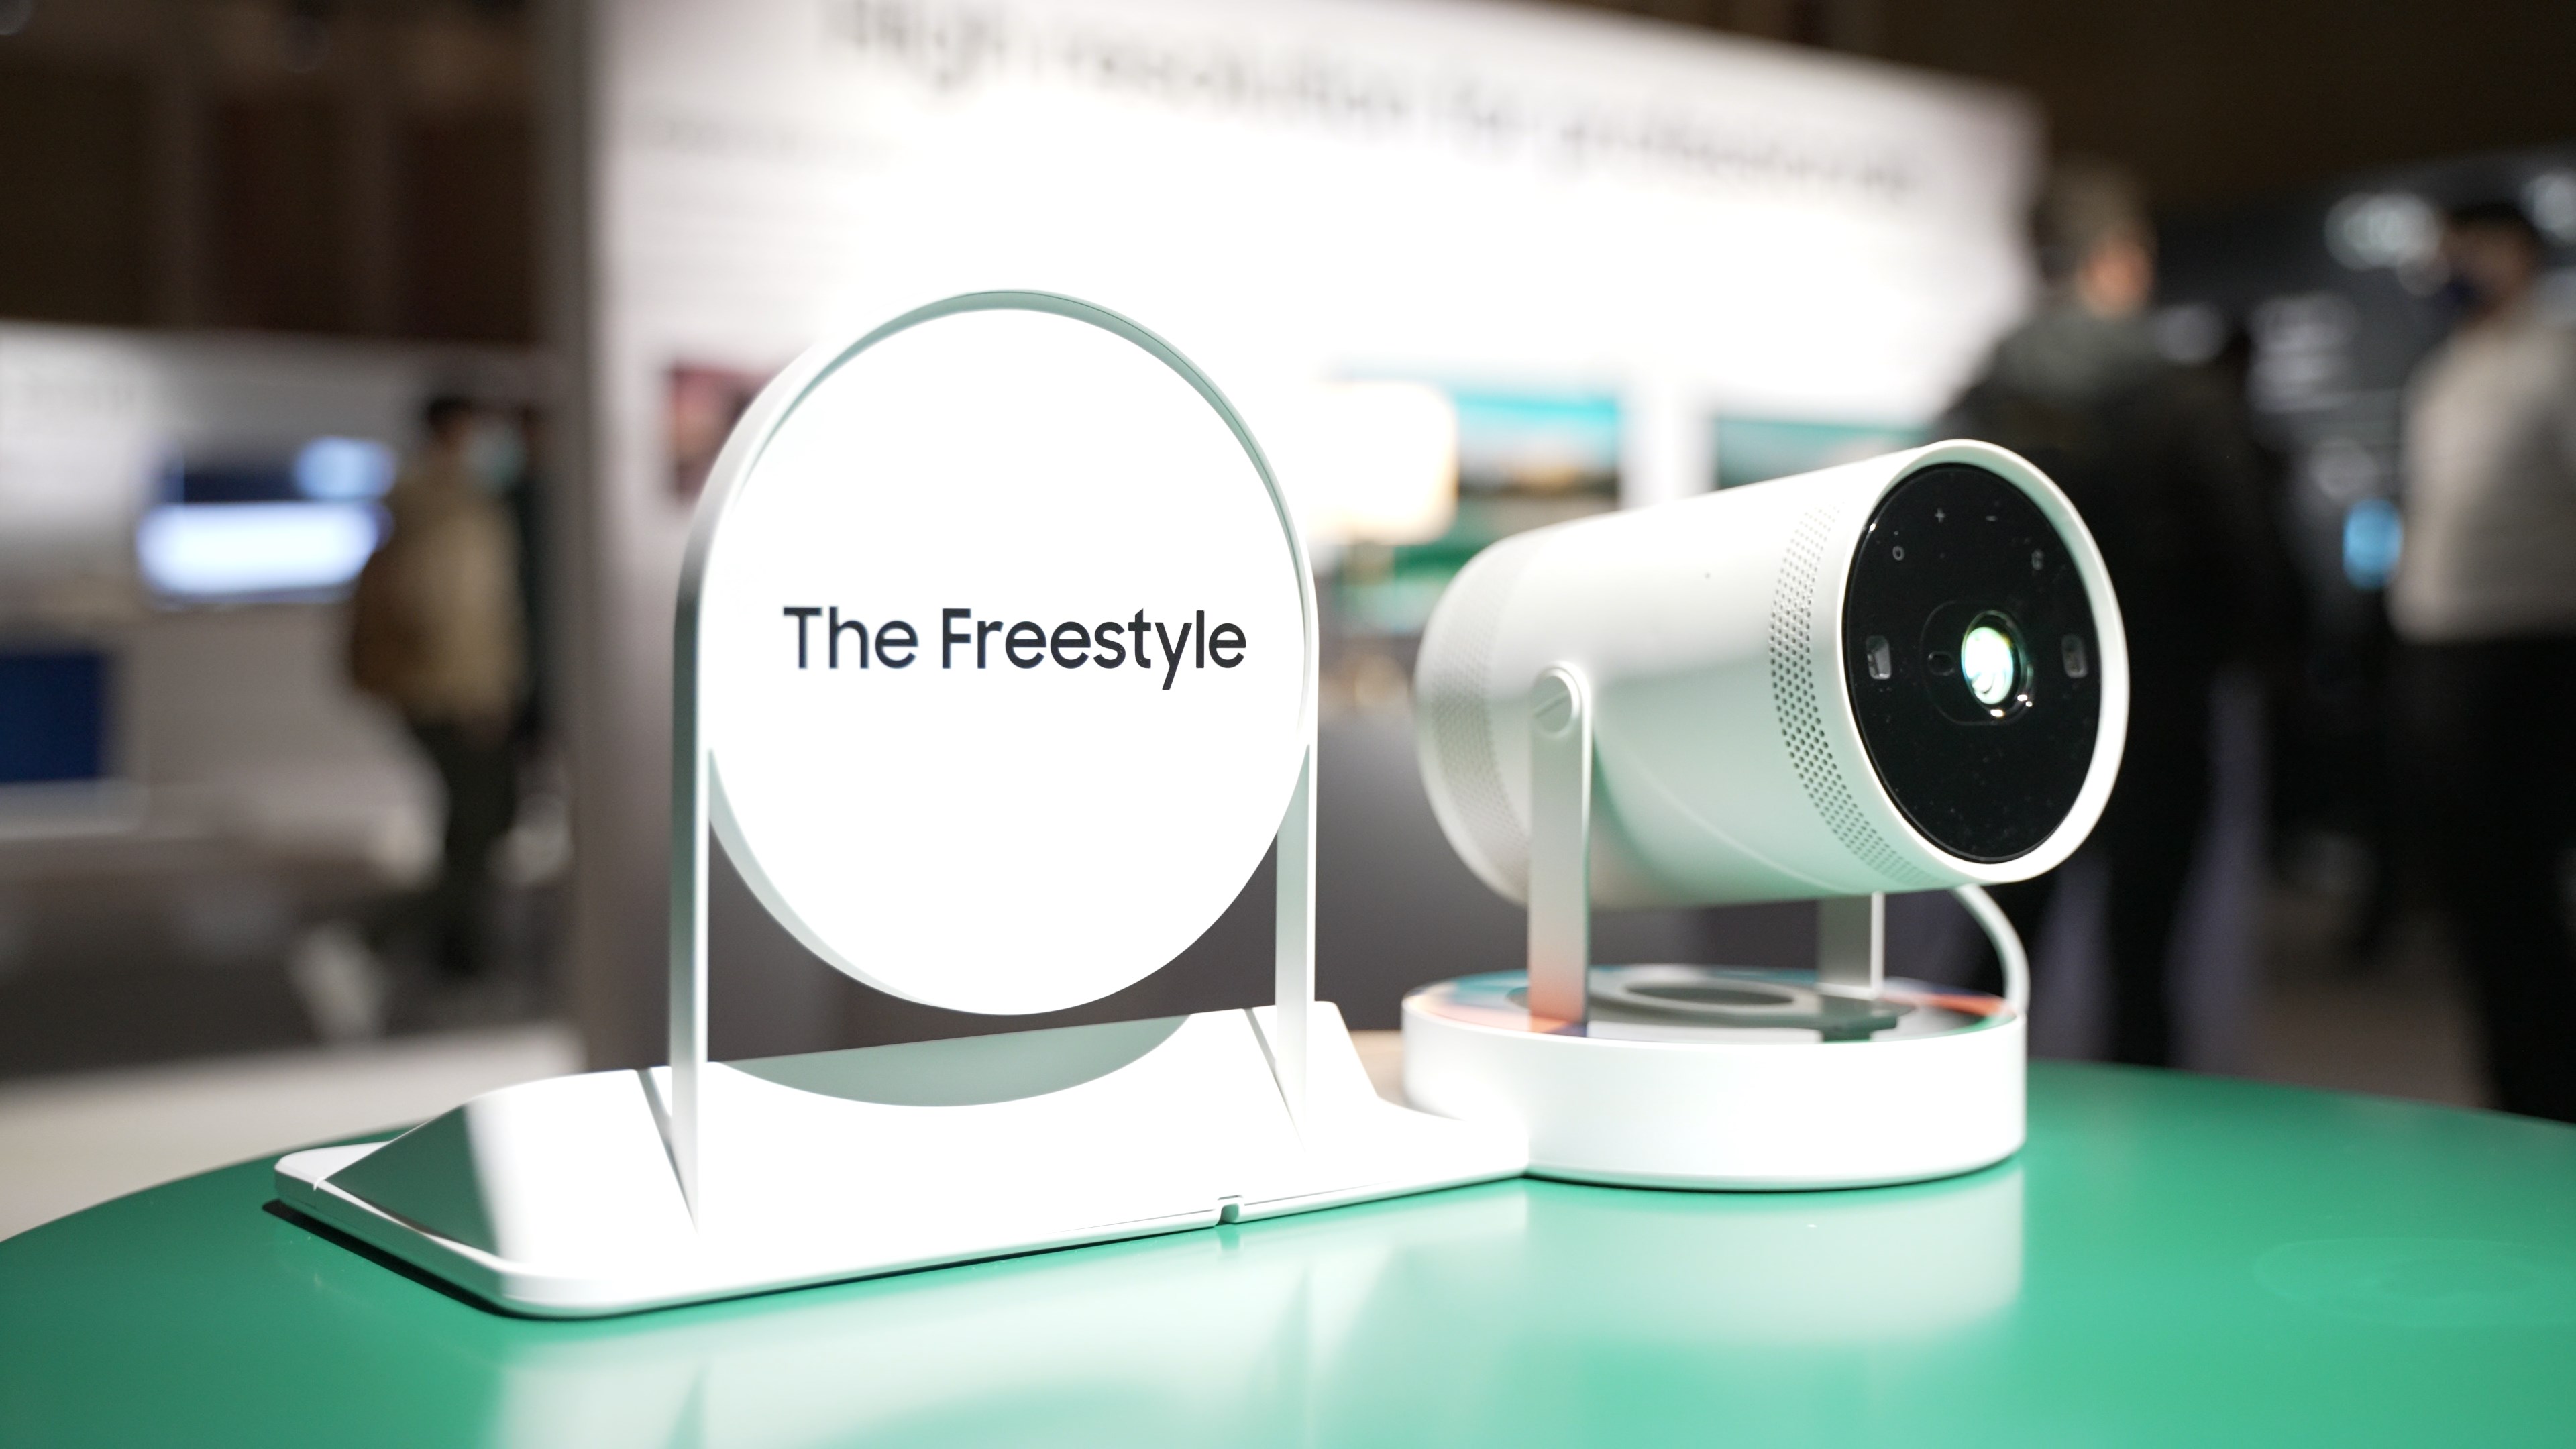 Samsung’s ‘Cheap’ Portable Projector is Actually Costlier in Africa